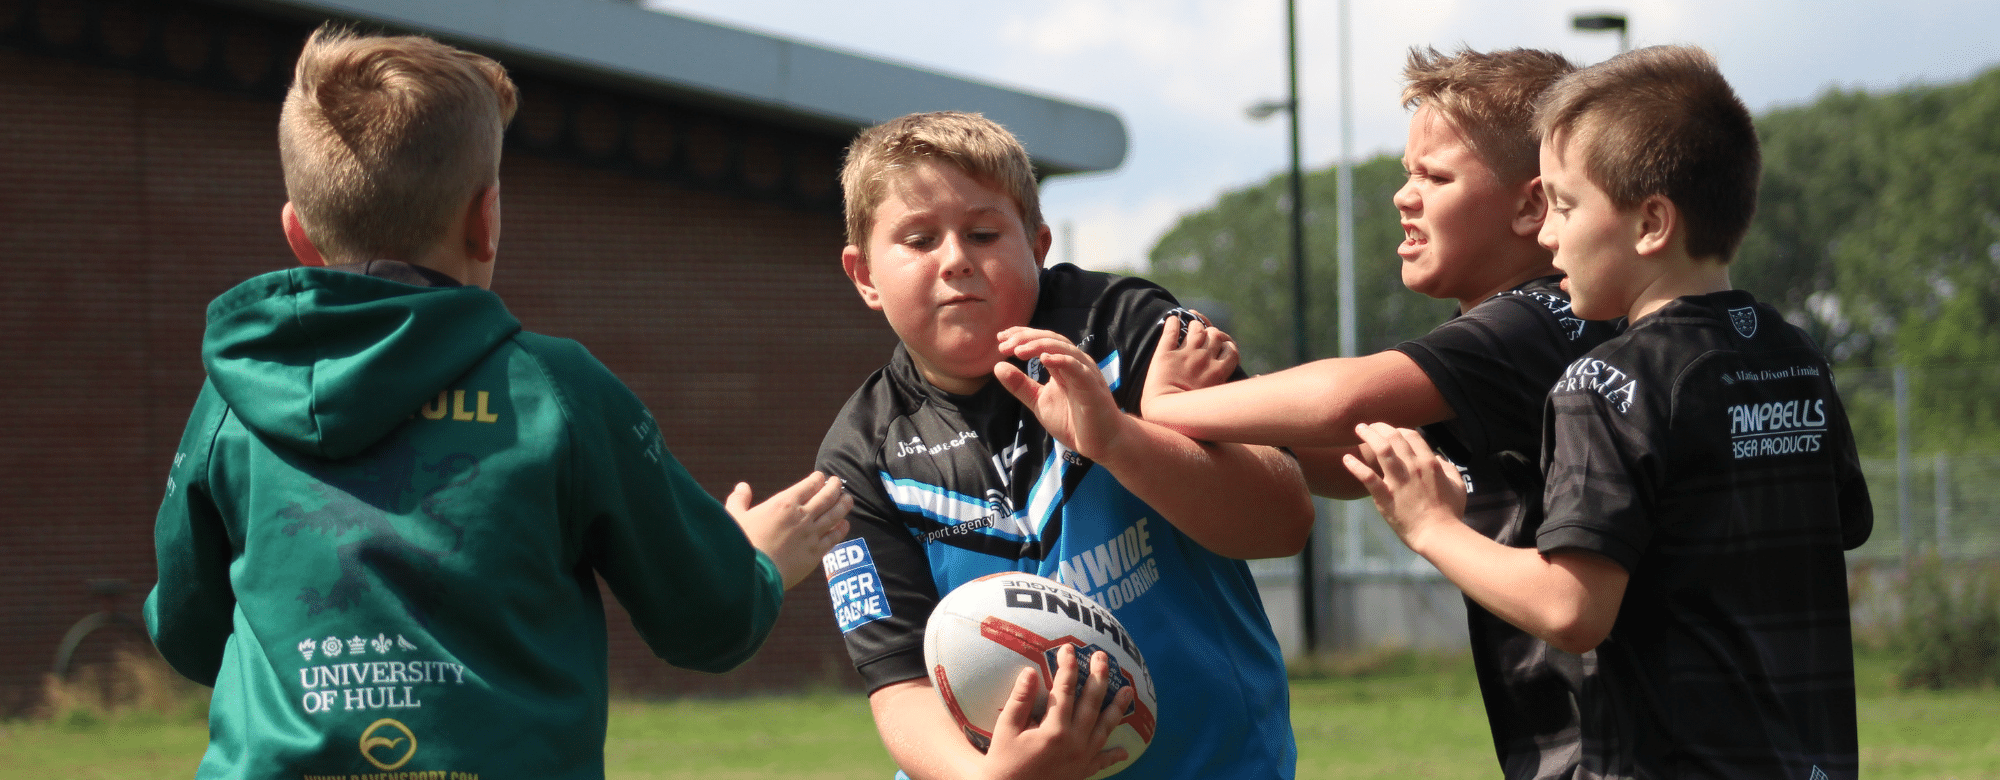 Junior Camps Return With October Half-Term Sessions